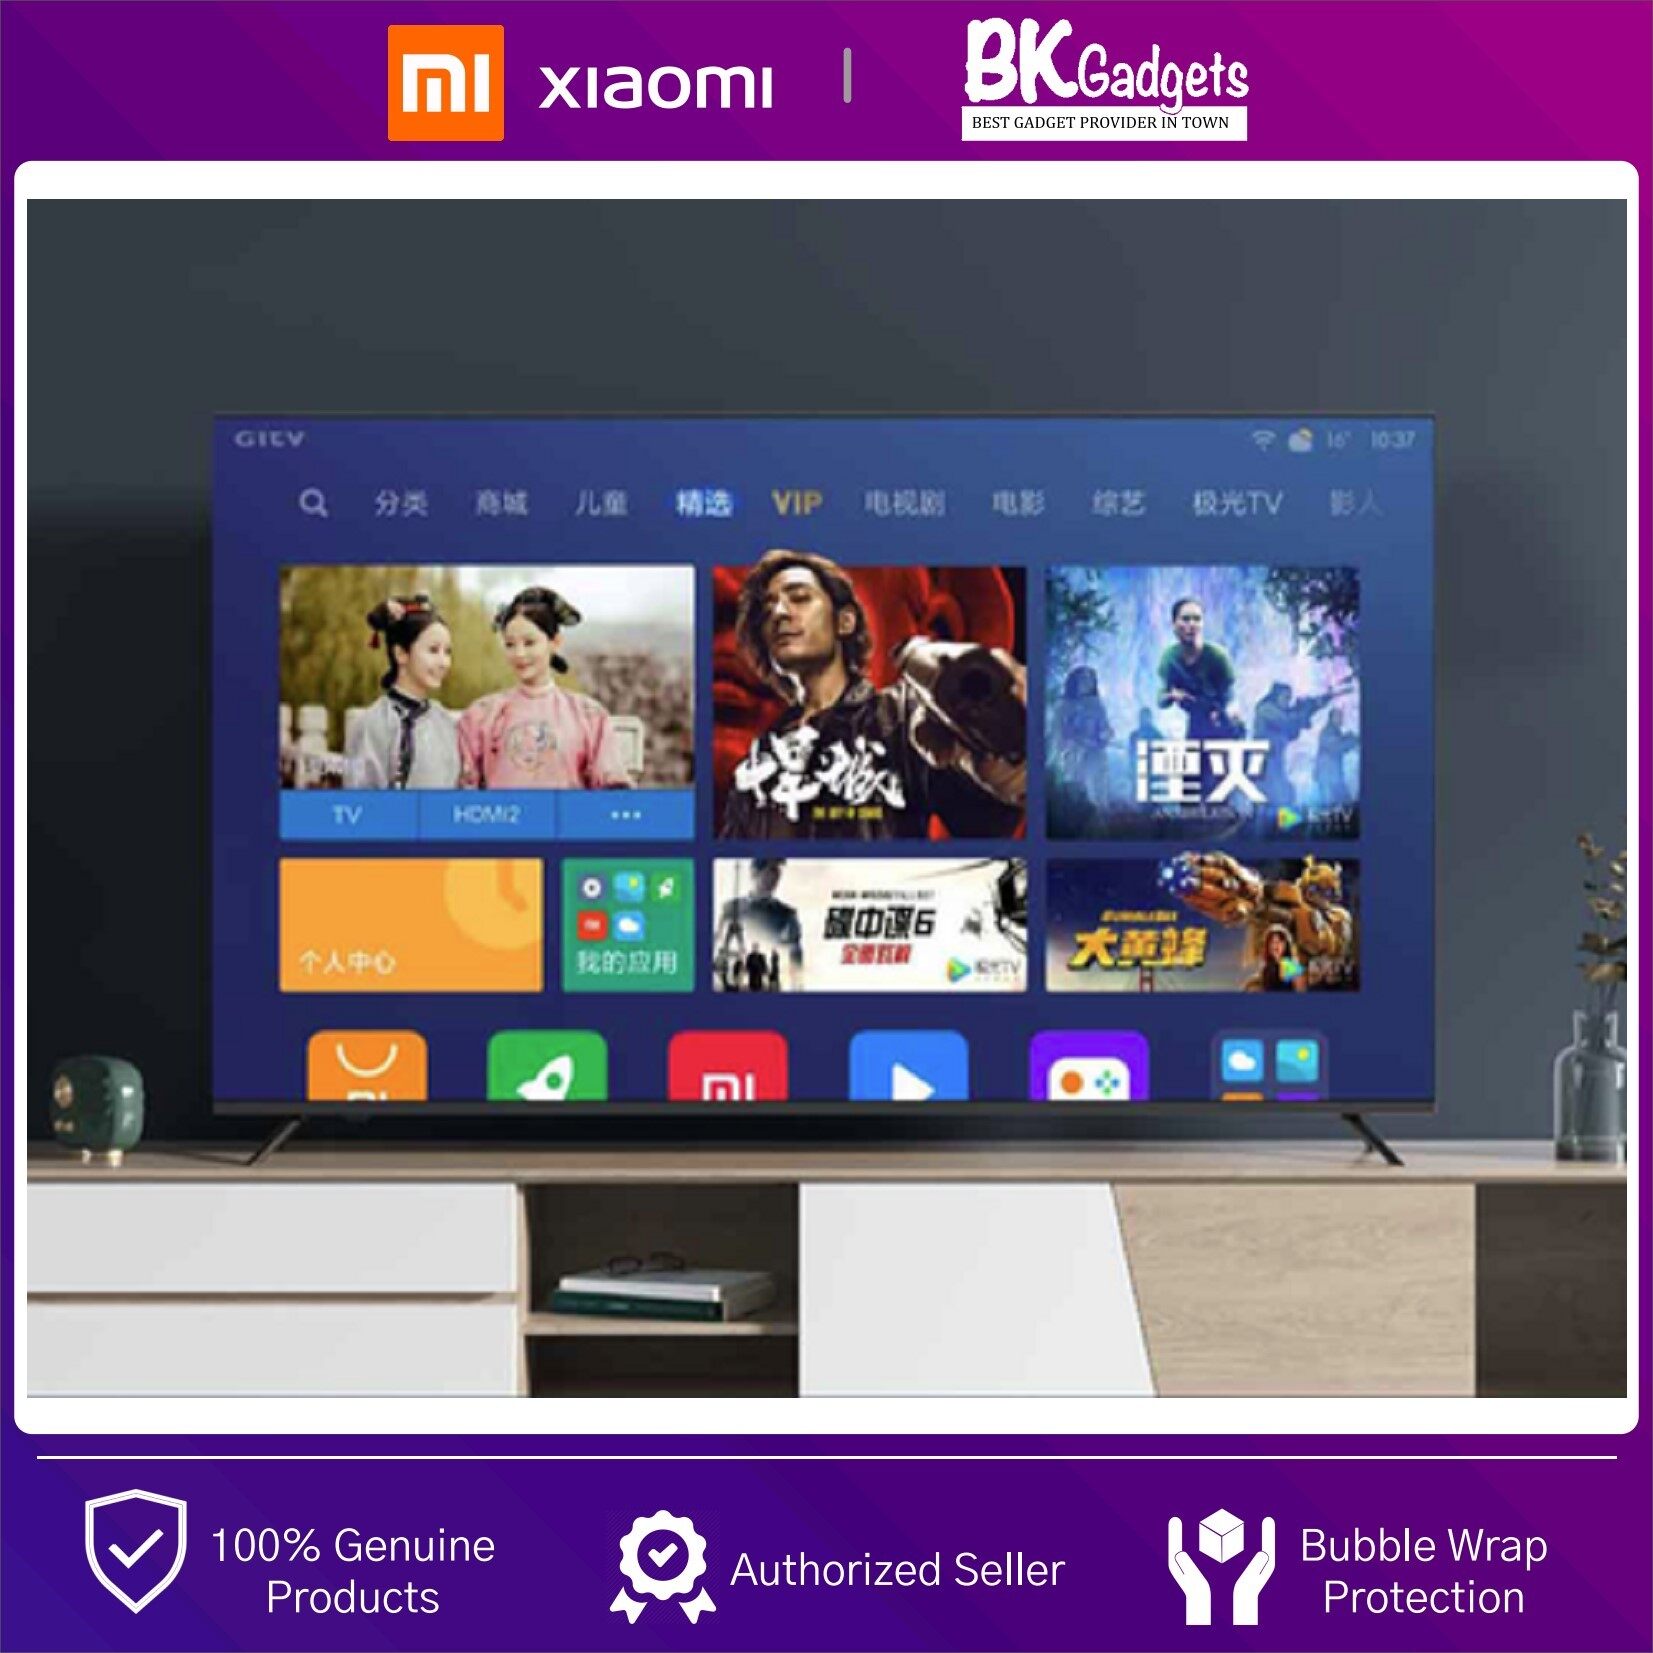 XiaoMi LED Smart TV E65X 65" 4K Ultra HD [ Chinese Version ] - Dolby Audio | DTS HD | 60Hz | 1 Year Malaysia Warranty